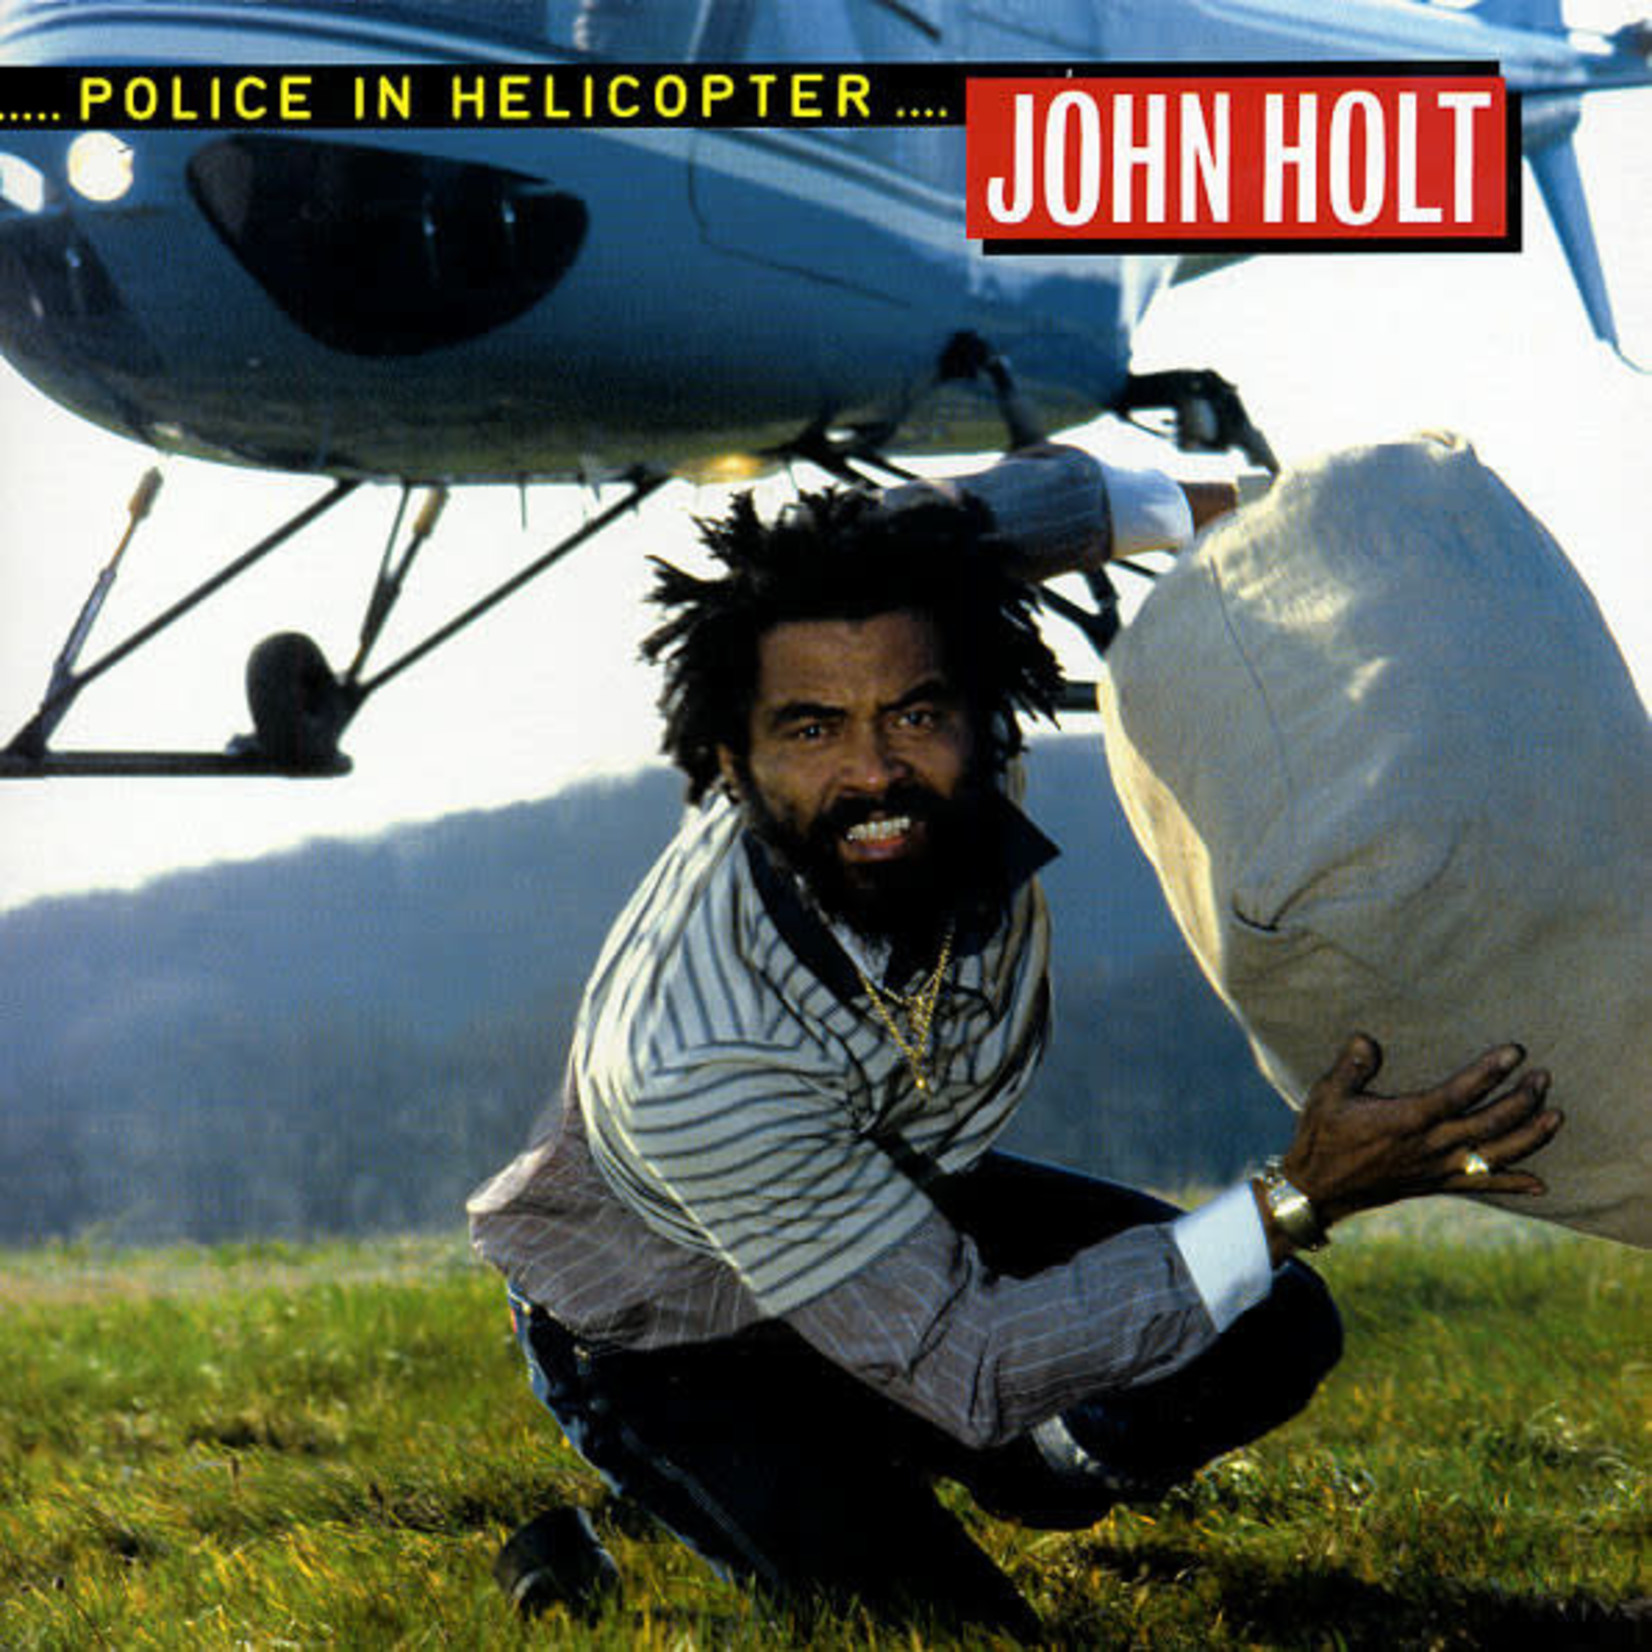 [New] John Holt - Police in Helicopter